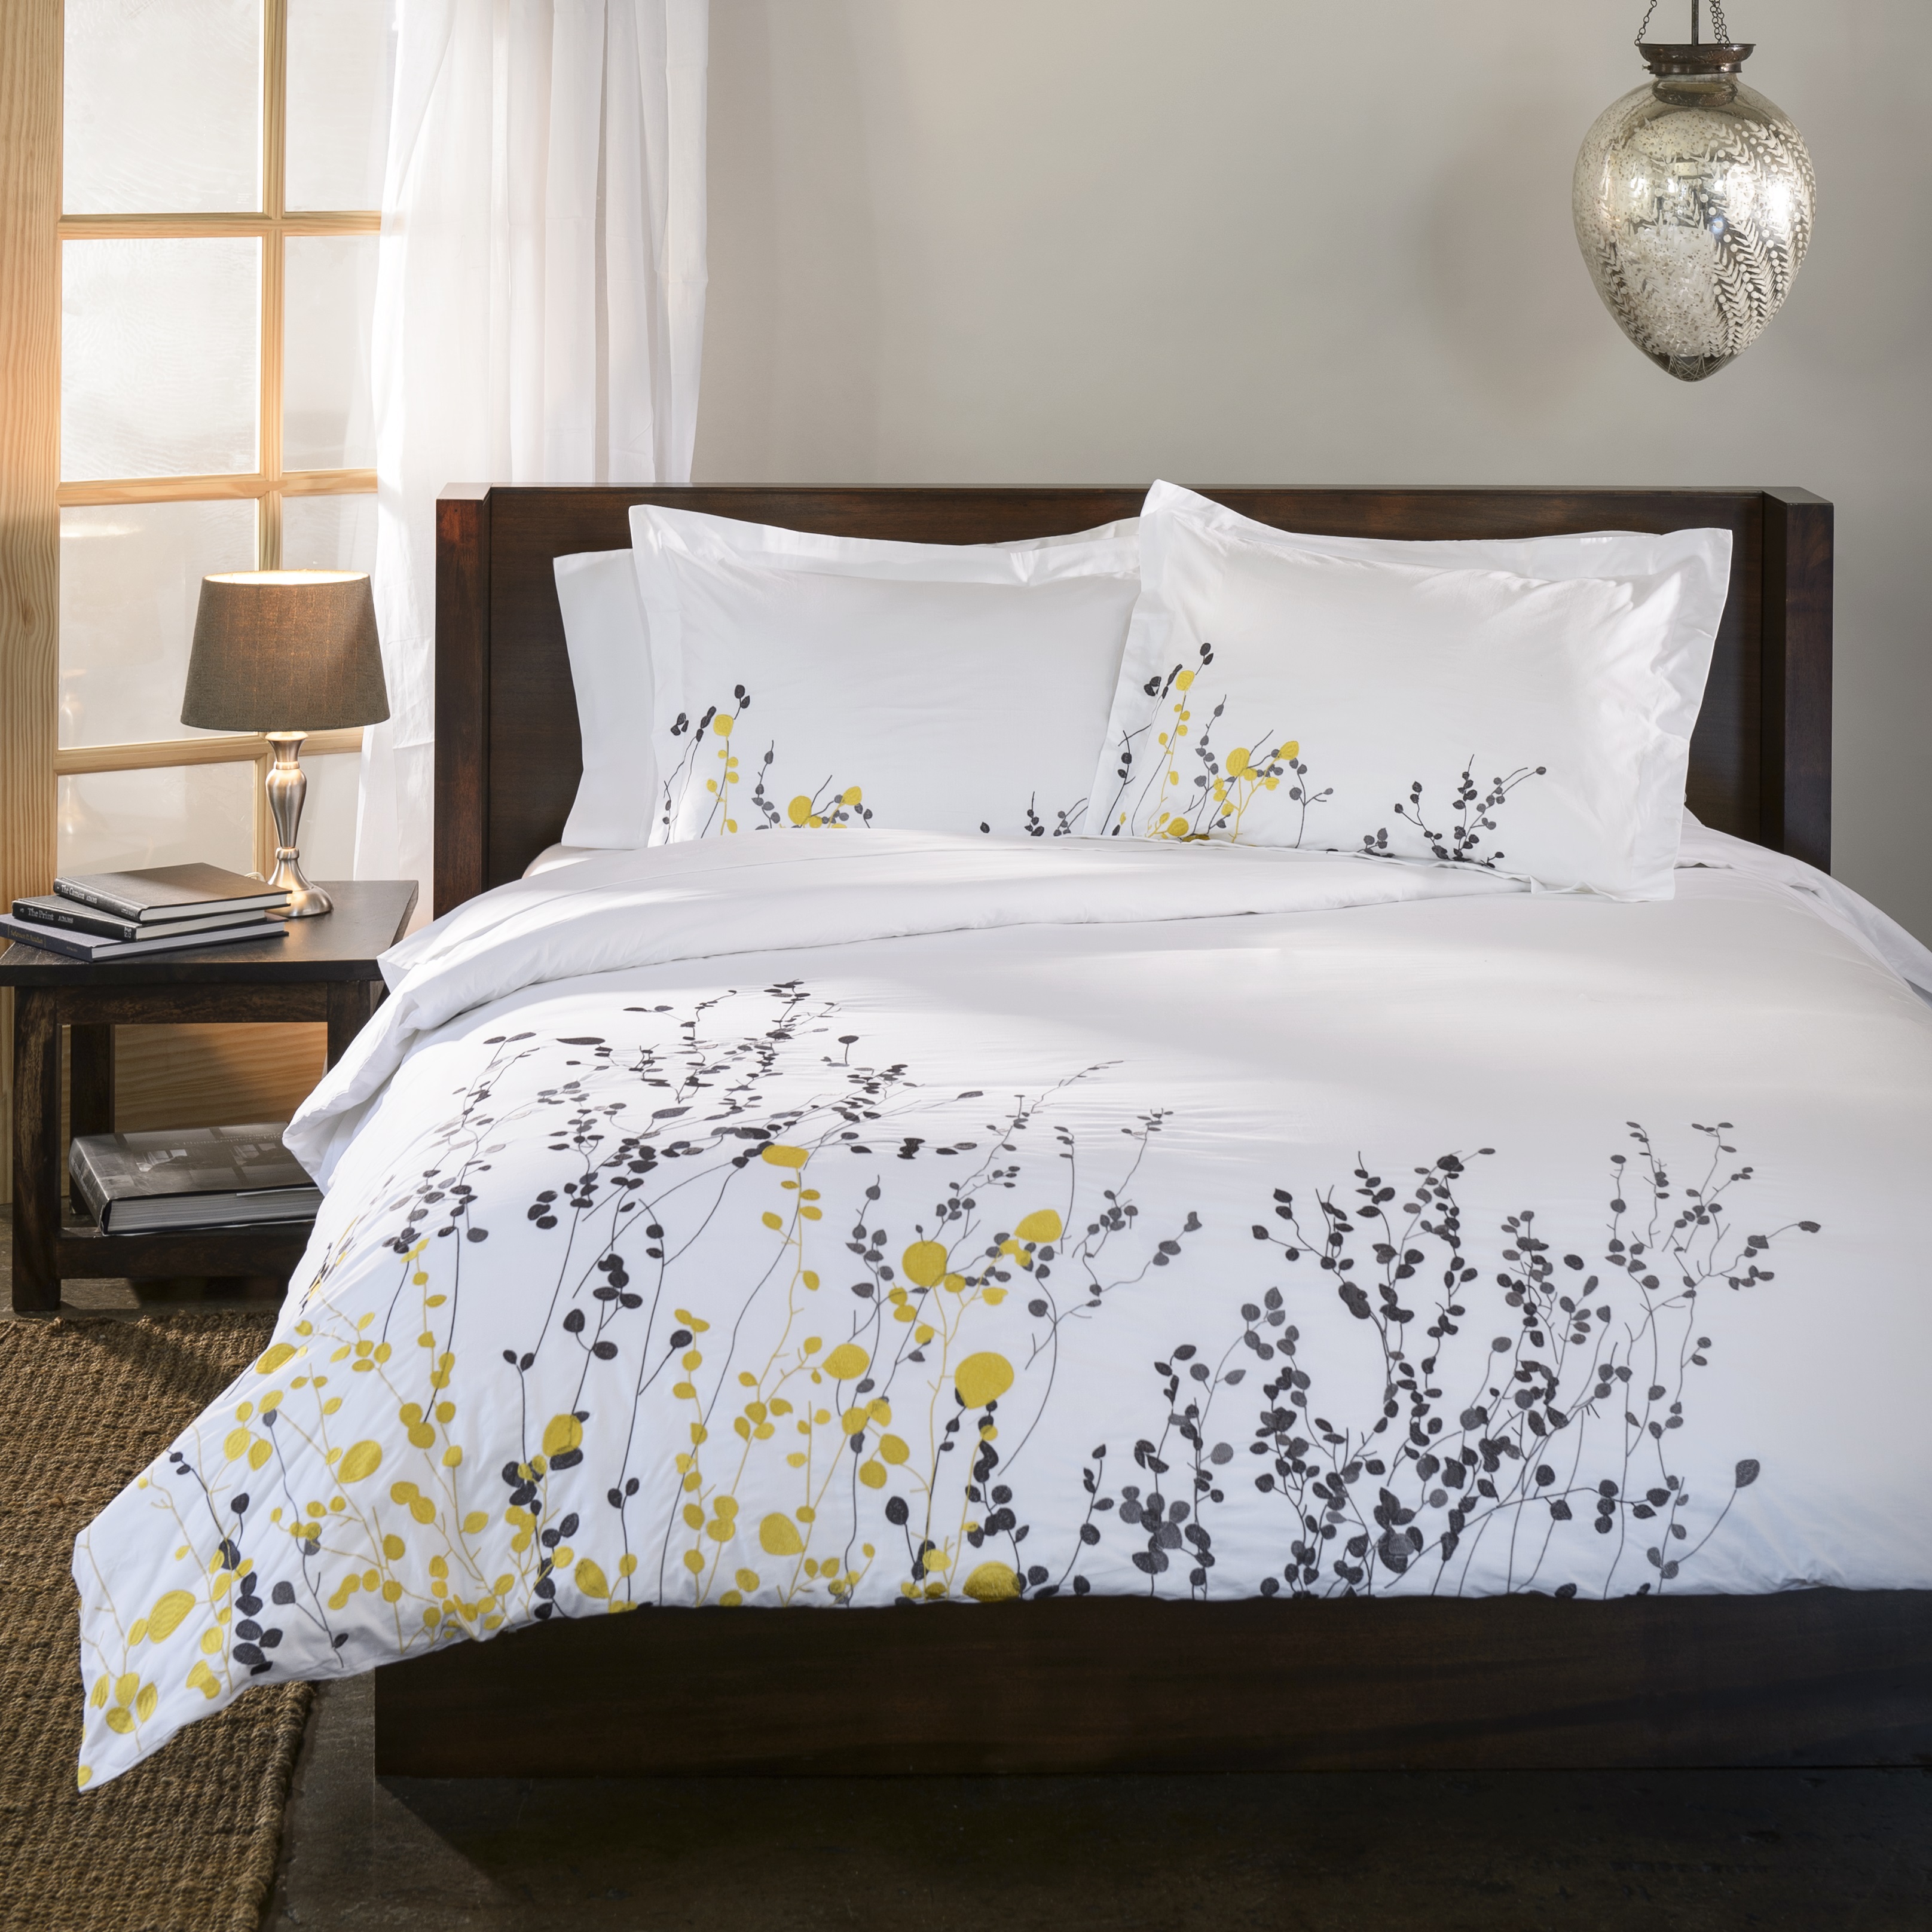 IMPRESSIONS REED Duvet Cover Set With Pillow Shams, Soft Cotton, Embroidered Design